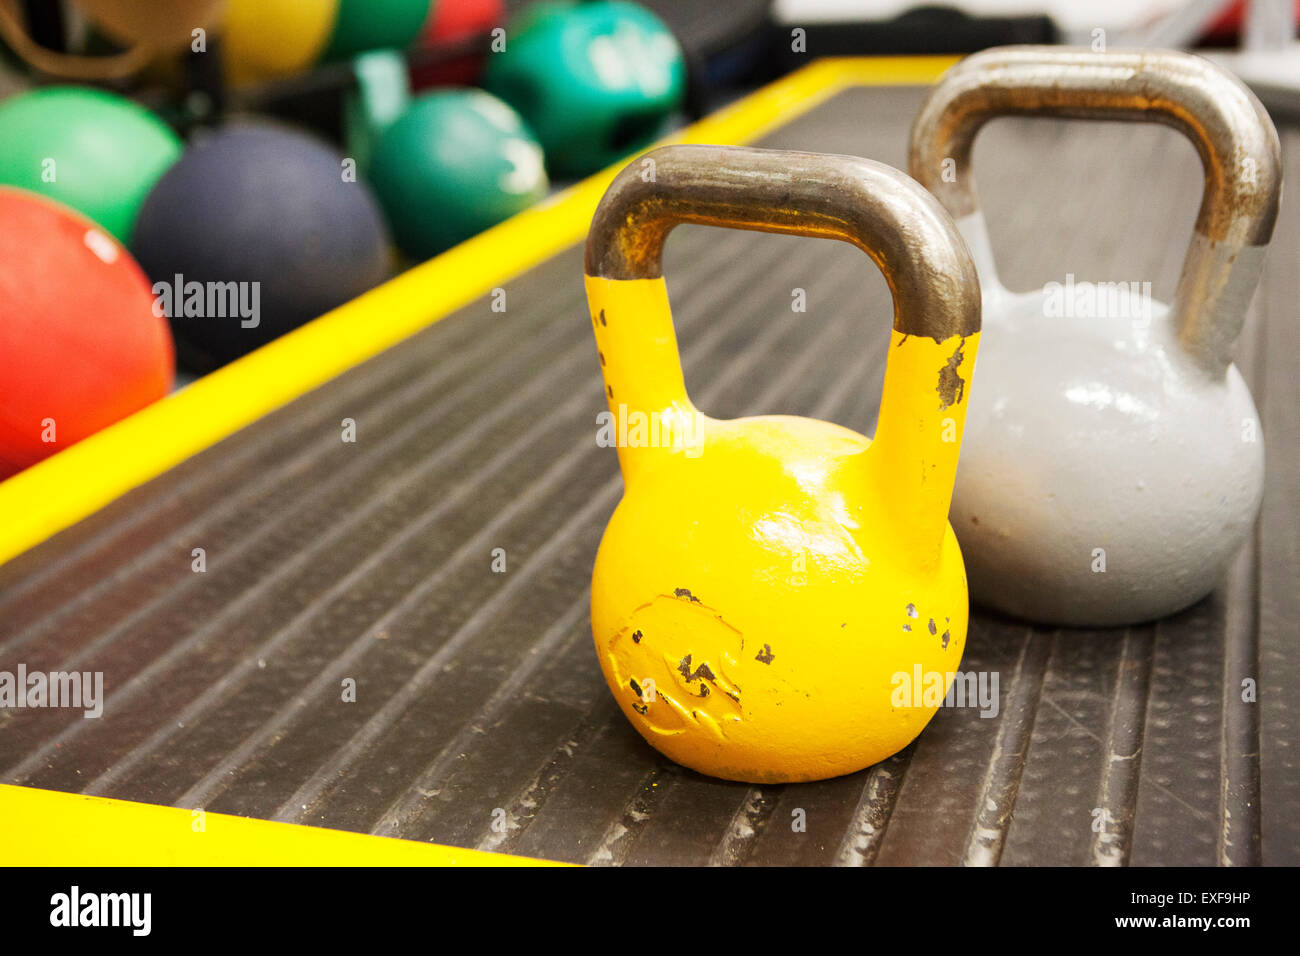 Kettle bell weights, close-up Stock Photo